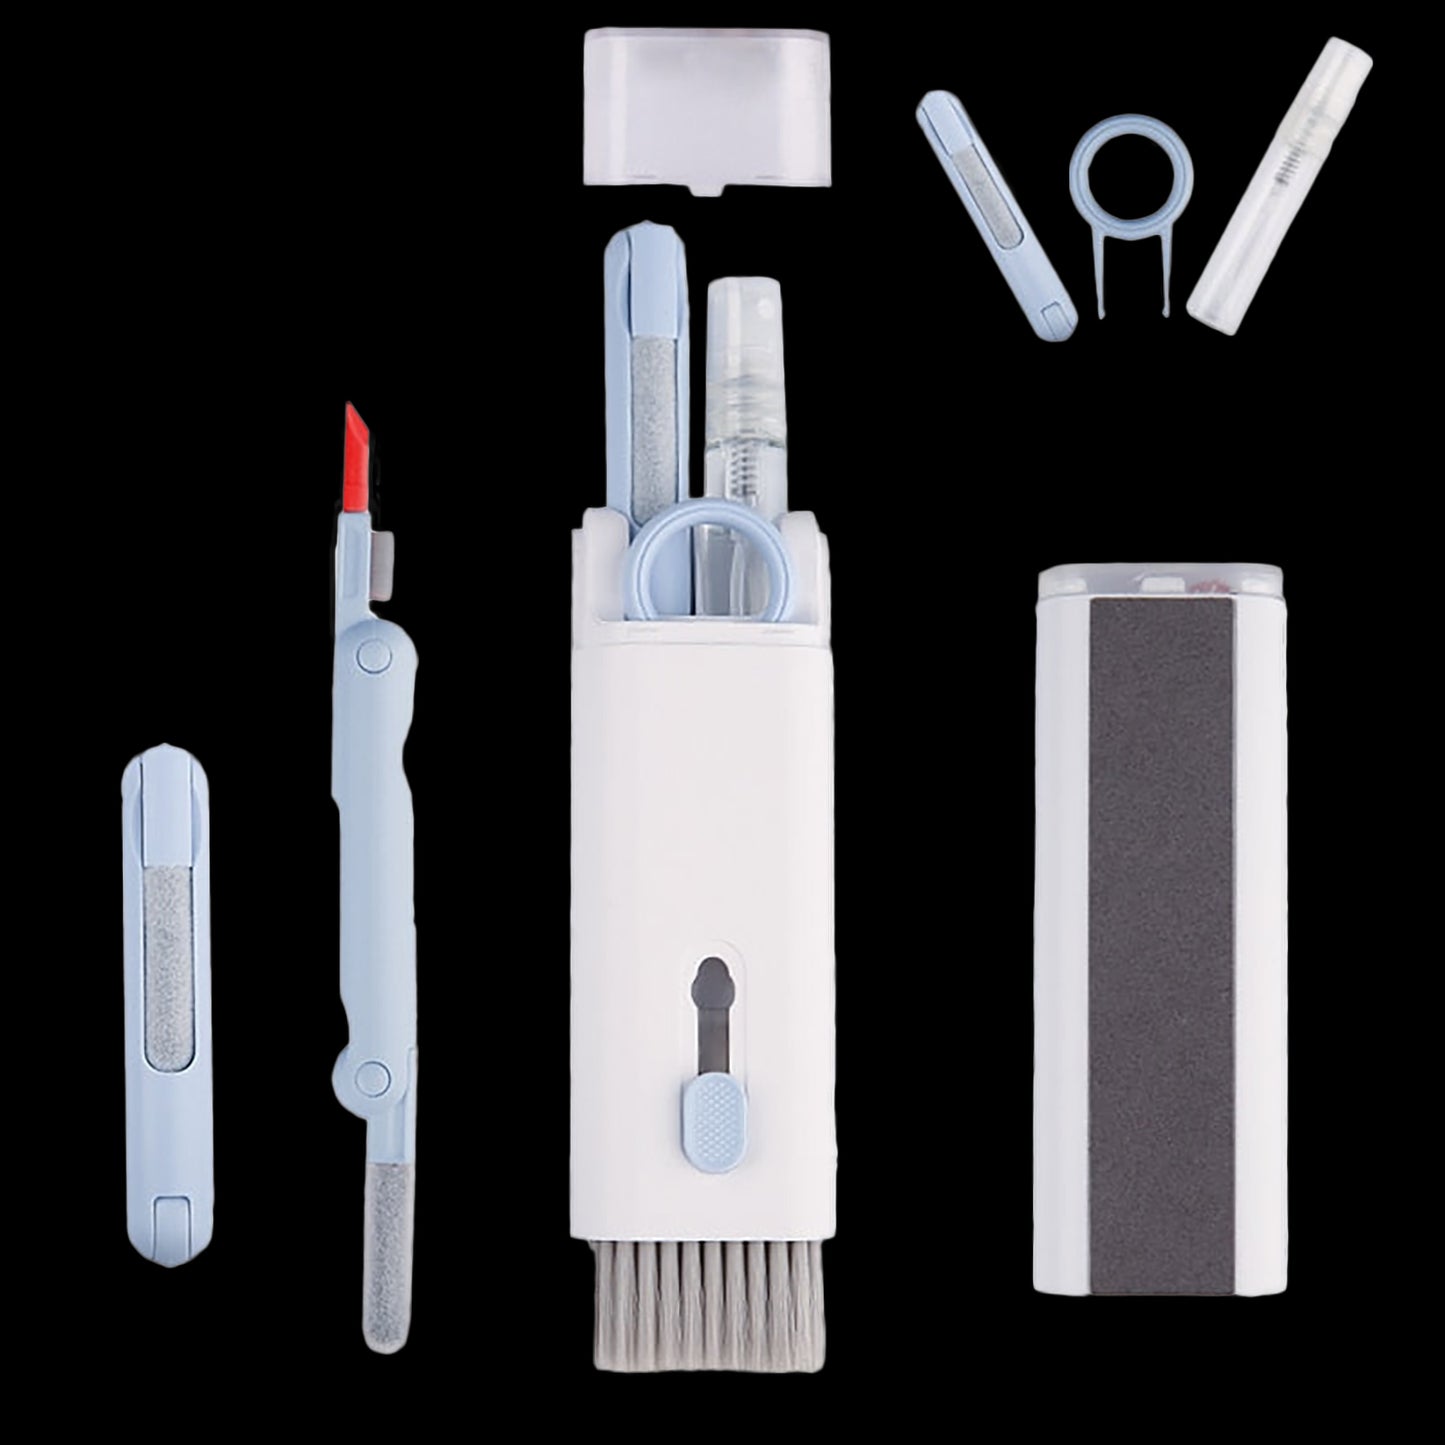 7-in-1 Device Cleaning Kit